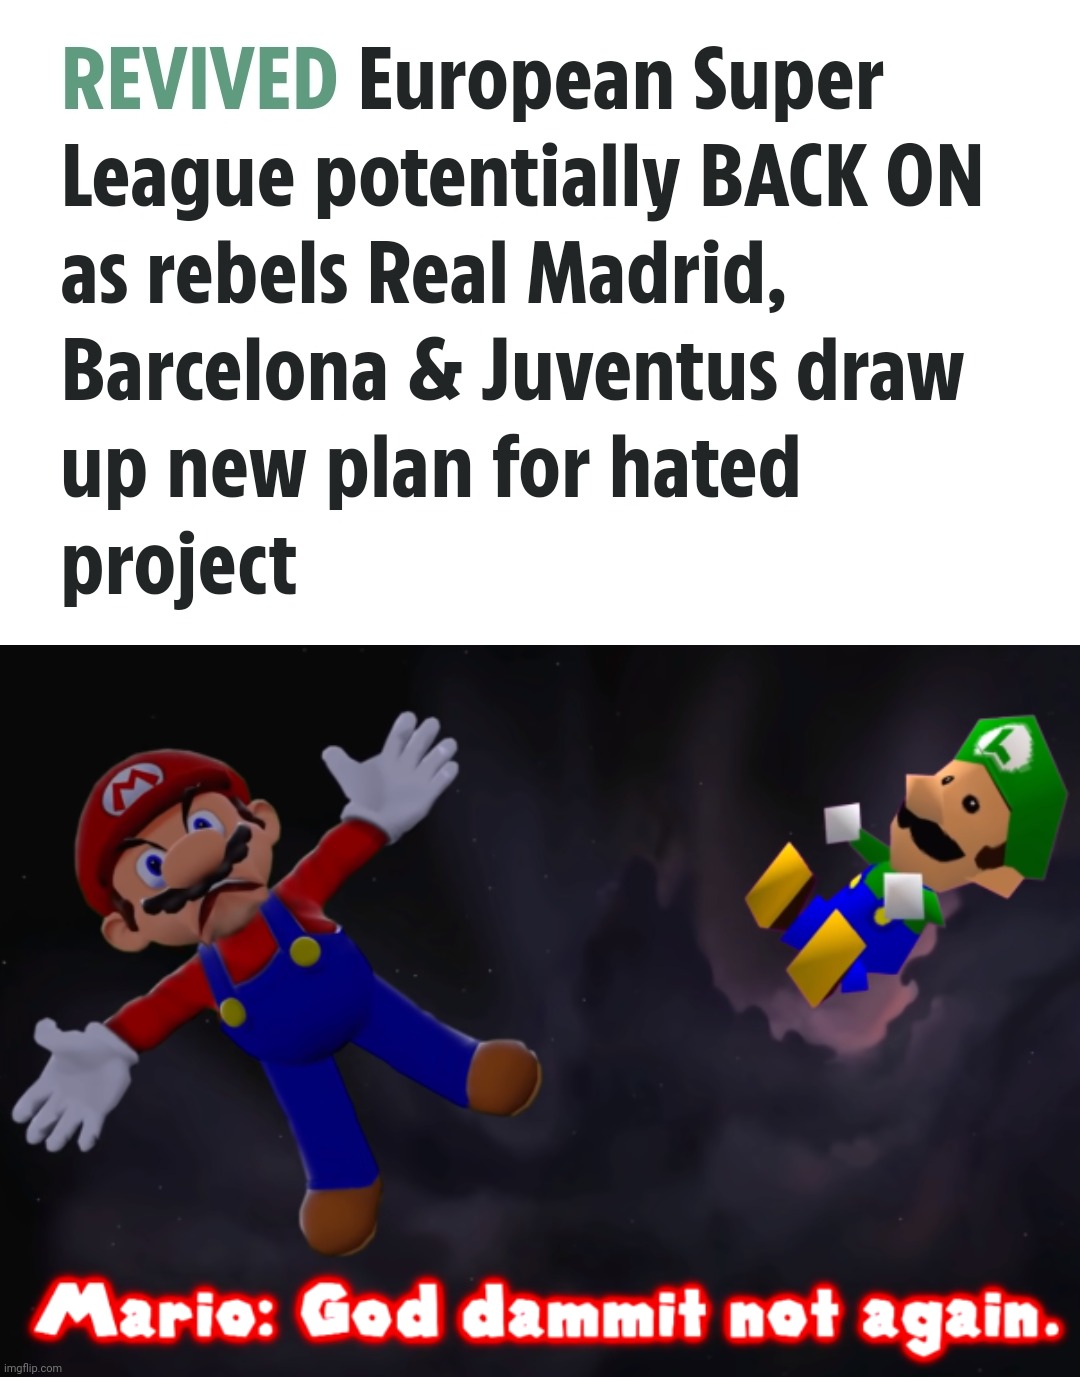 Oh noes! | image tagged in smg4 mario not again,european super league,football,soccer,we're all doomed,memes | made w/ Imgflip meme maker